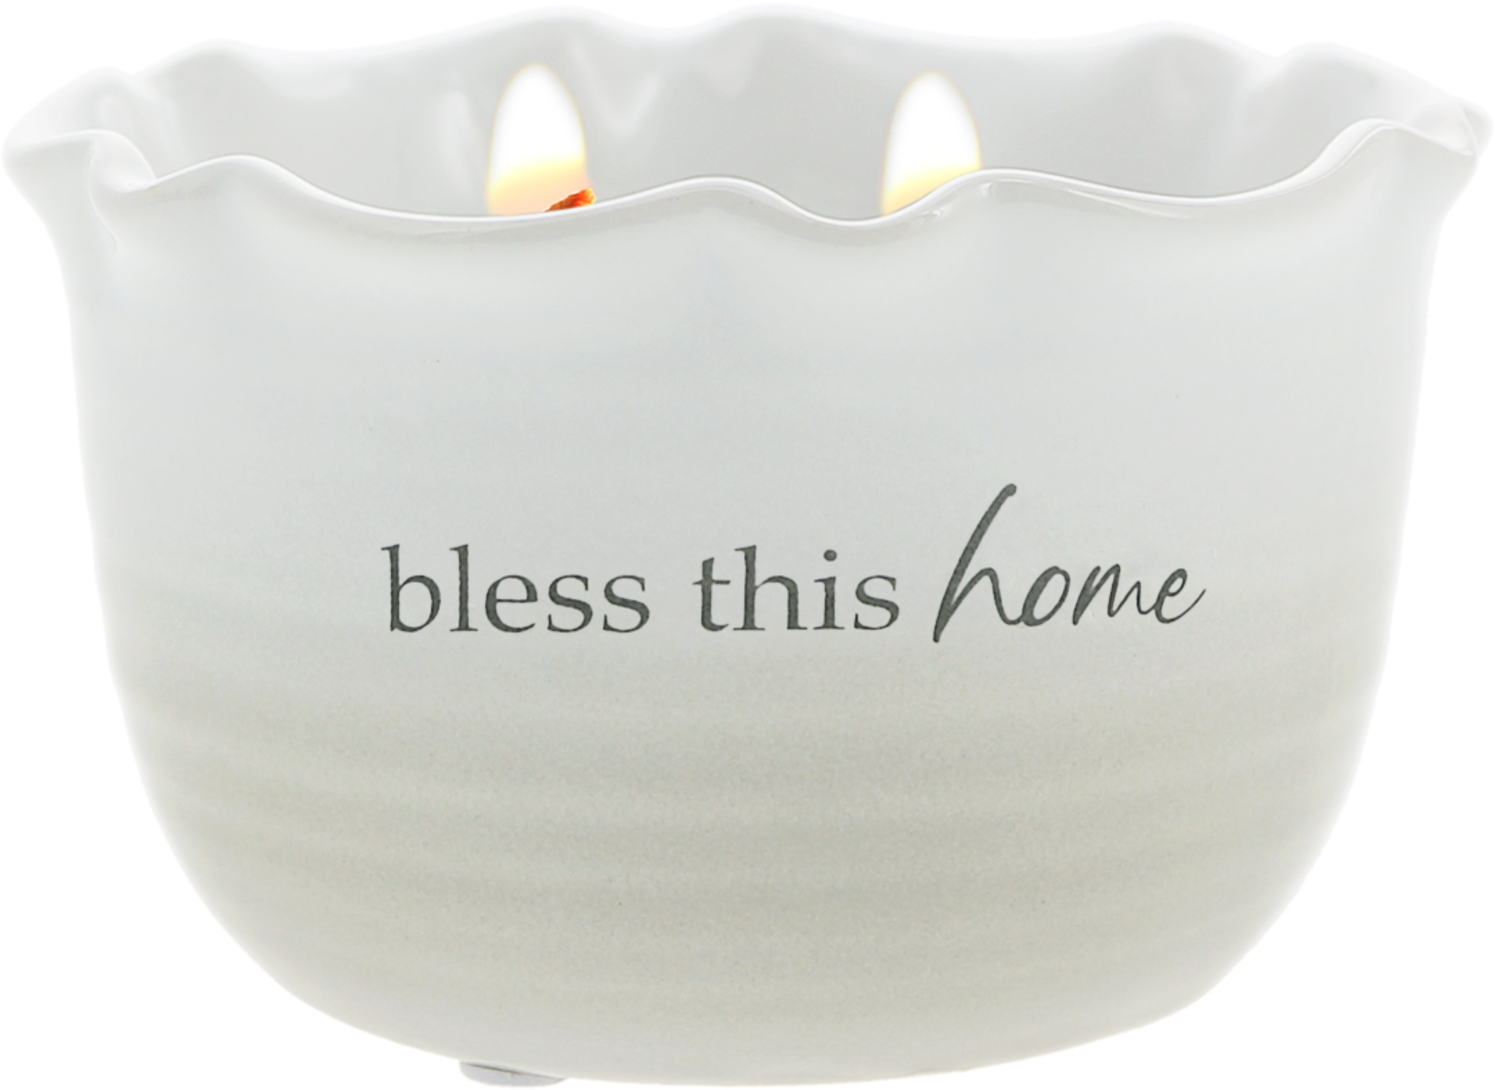 Bless This Home by Thoughts of Home - Bless This Home - 11 oz - 100% Soy Wax Reveal Candle
Scent: Tranquility